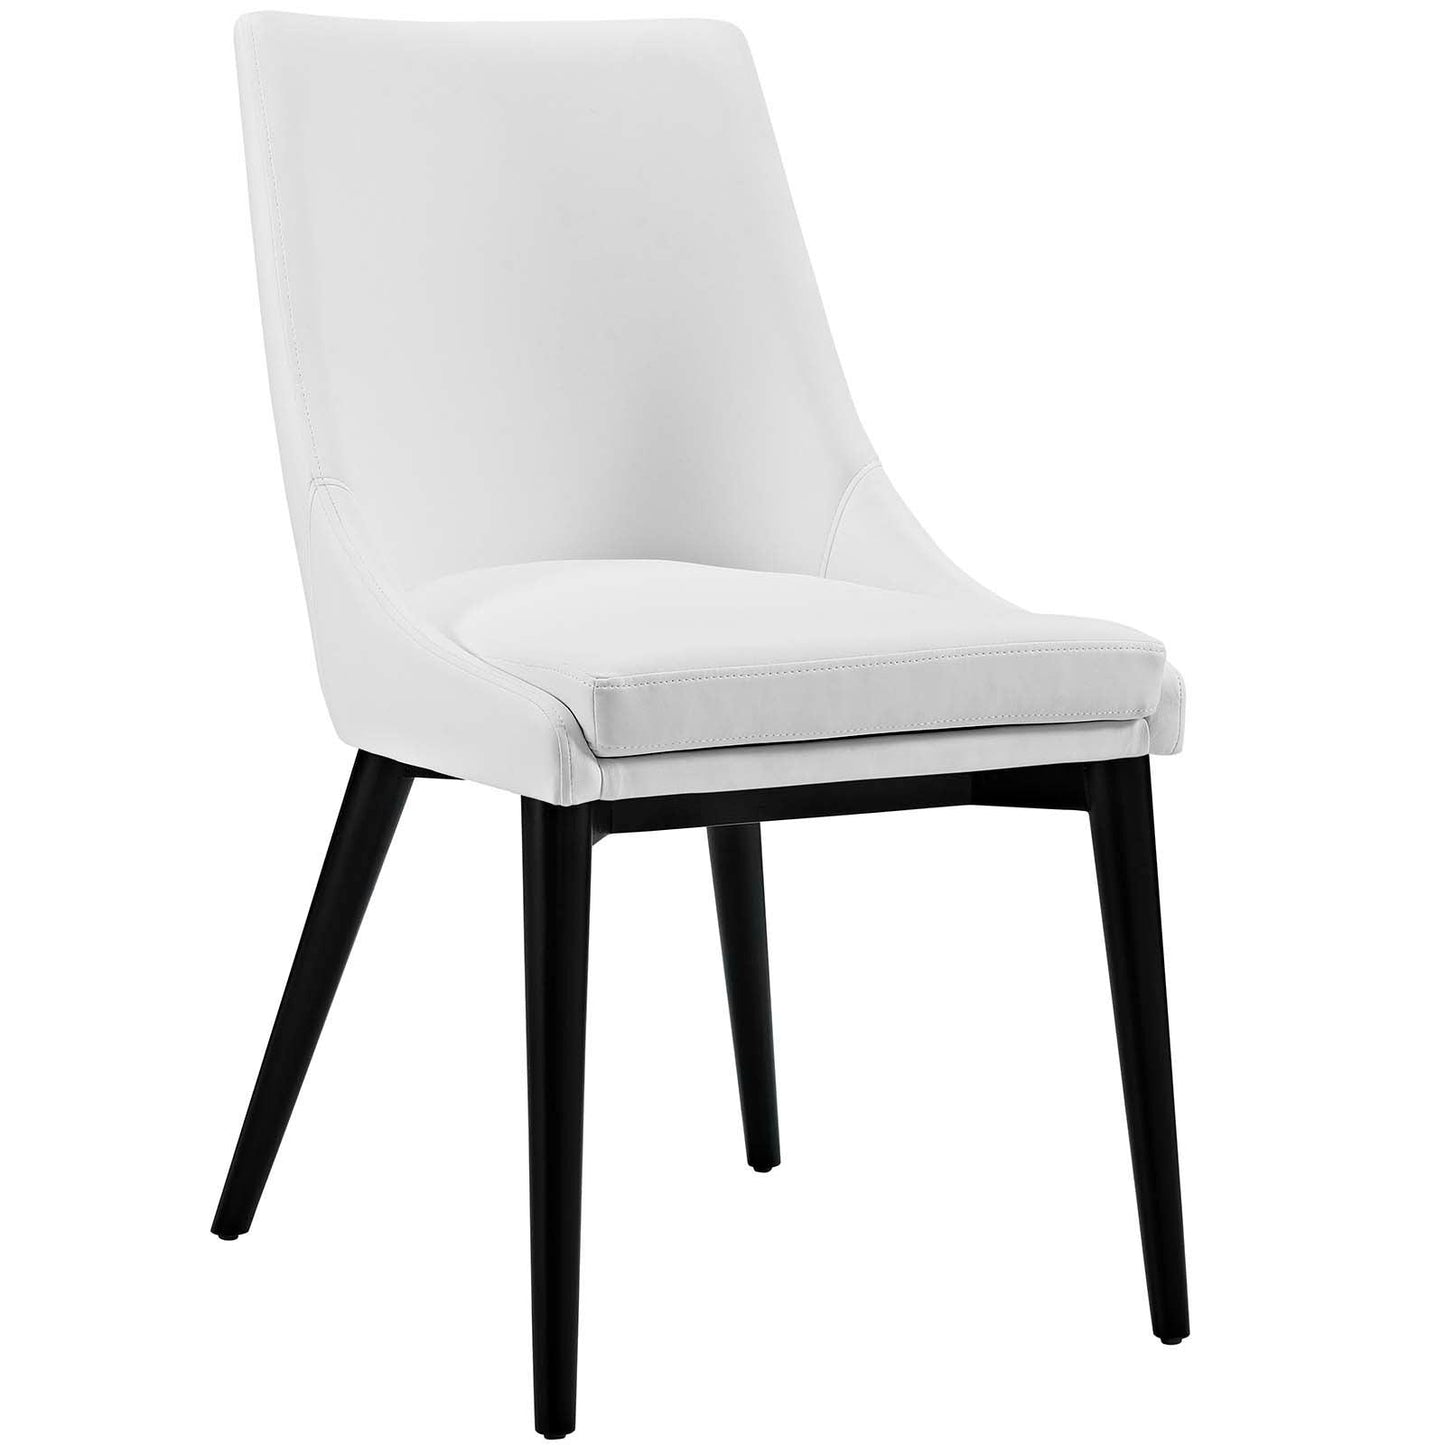 Modway Viscount Vegan Leather Dining Chair FredCo